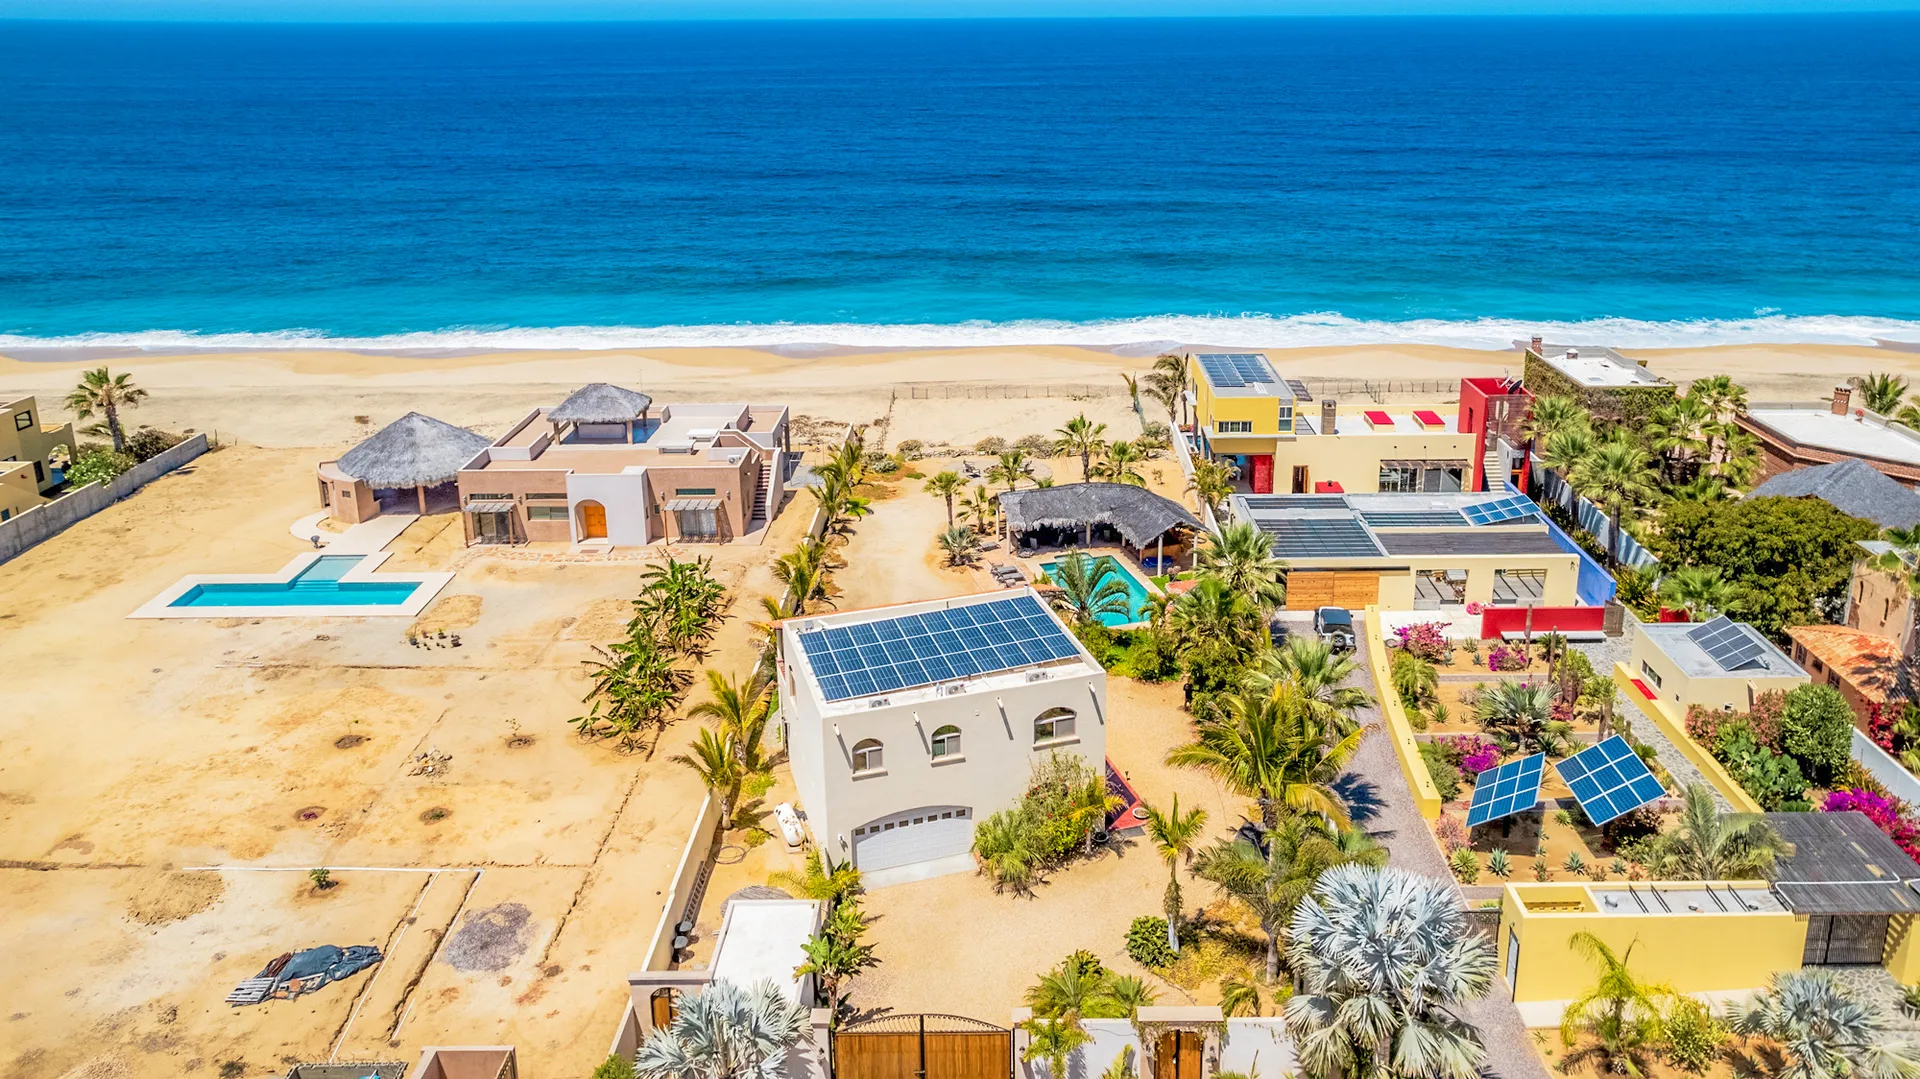 Forty-five minutes from downtown Cabo San Lucas, discover a rare opportunity to acquire an oceanfront property in prestigious Rancho Nuevo